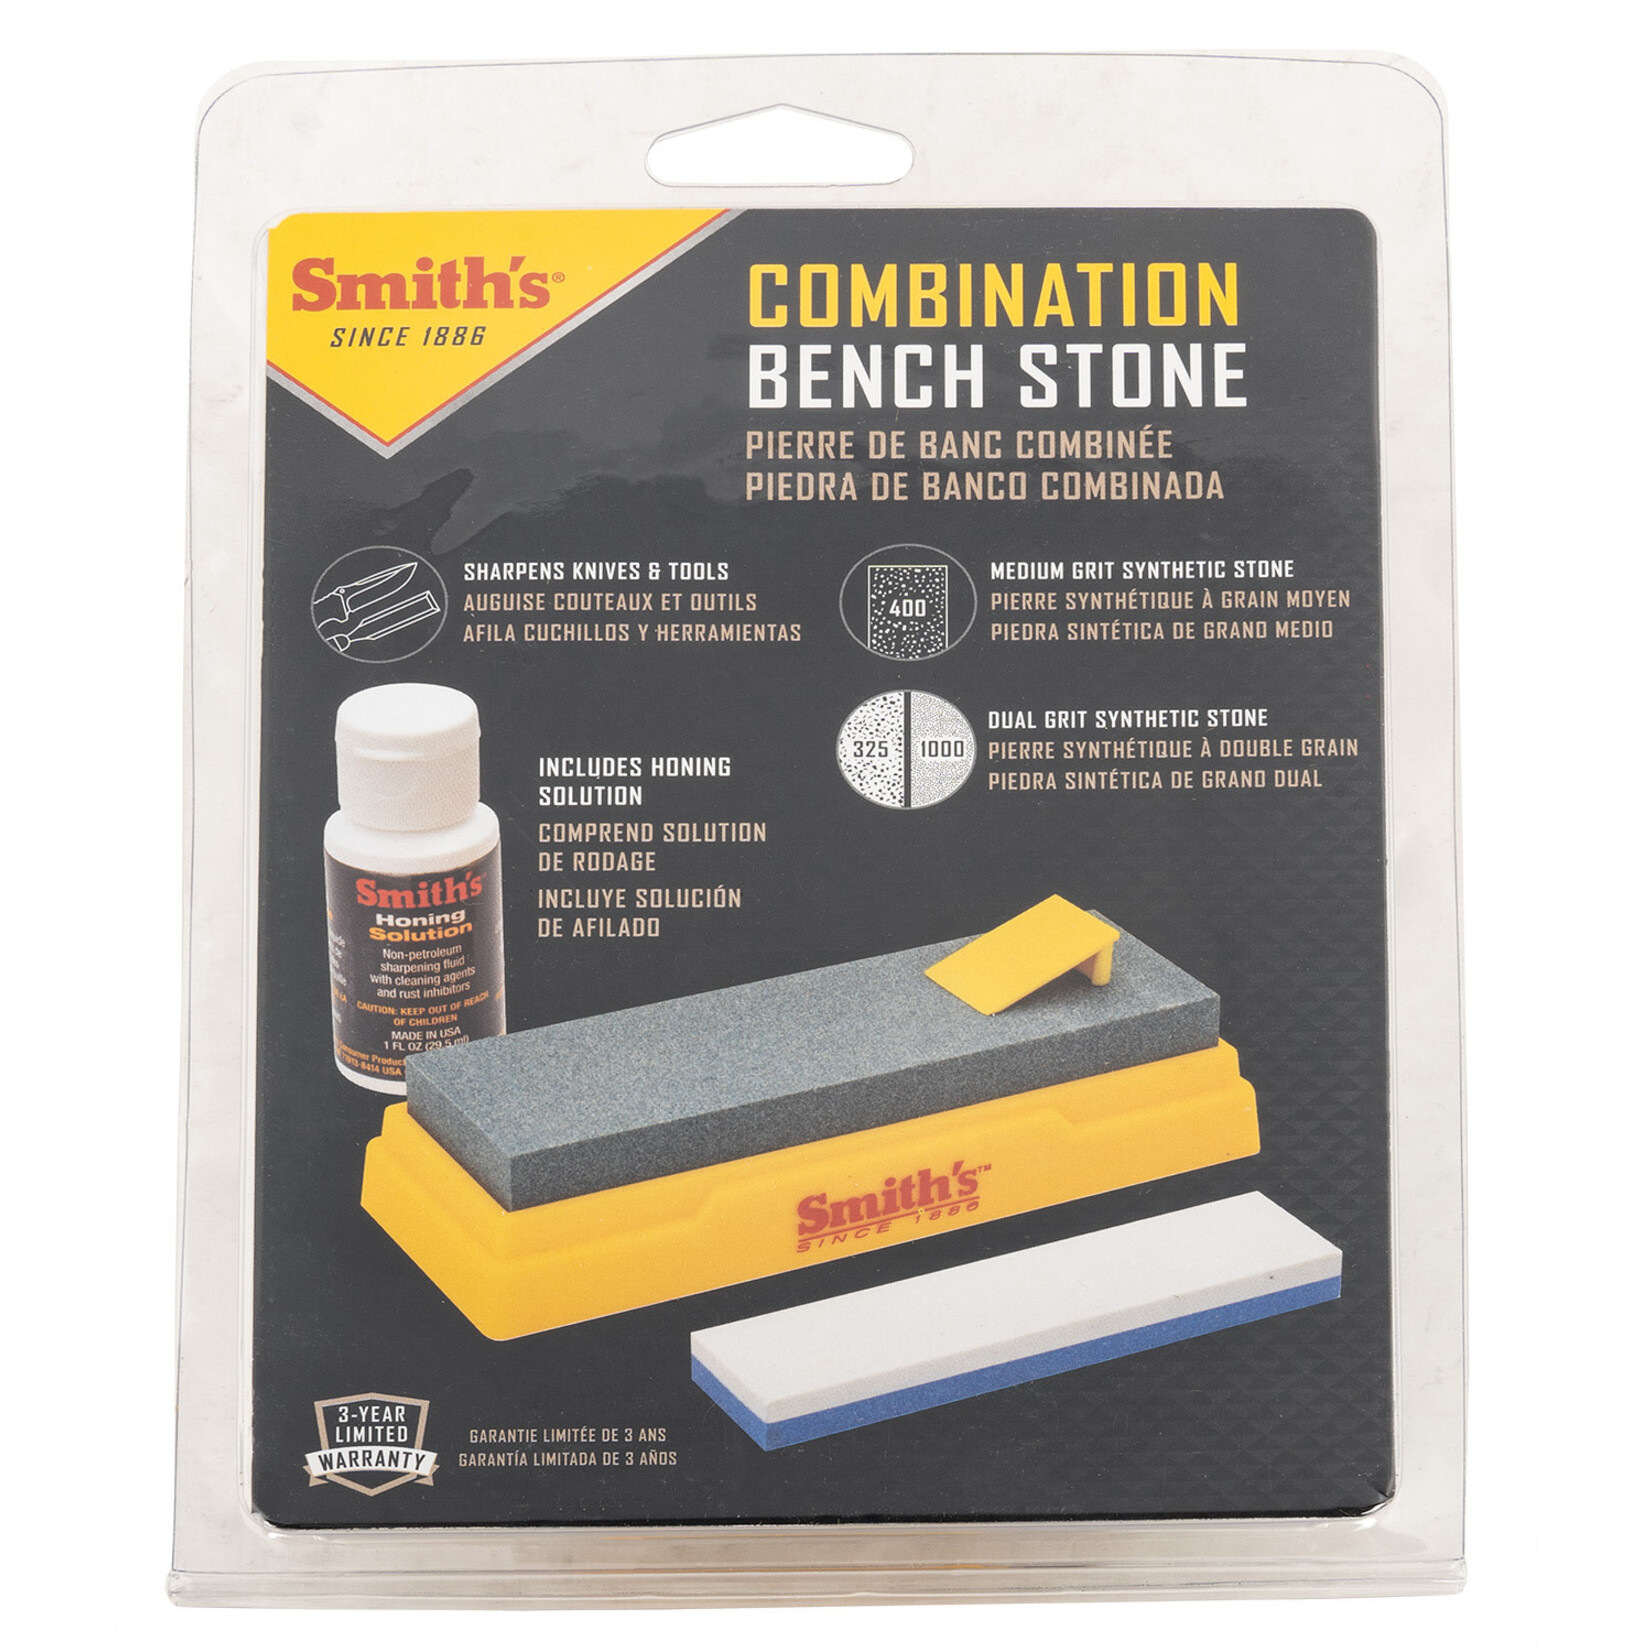 Smiths Products Combination Bench Stone Gray/Yellow Synthetic Stone Includes Honing Oil